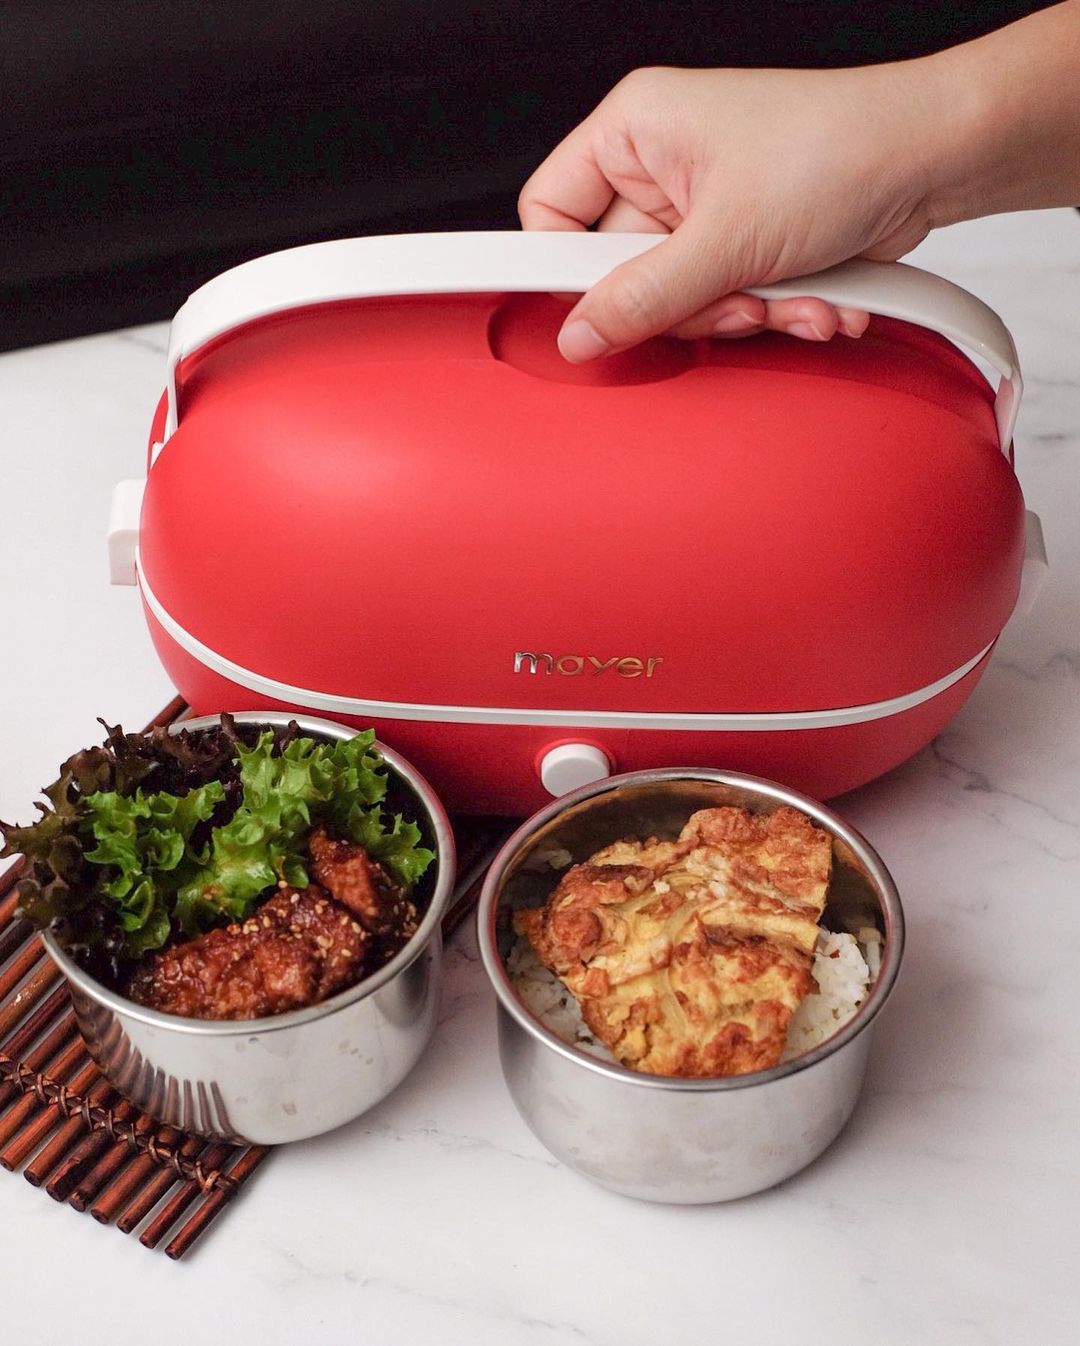 Bring a hot lunch with you to the job site using the COZYEXPERT Electric Lunch  Box - The Gadgeteer